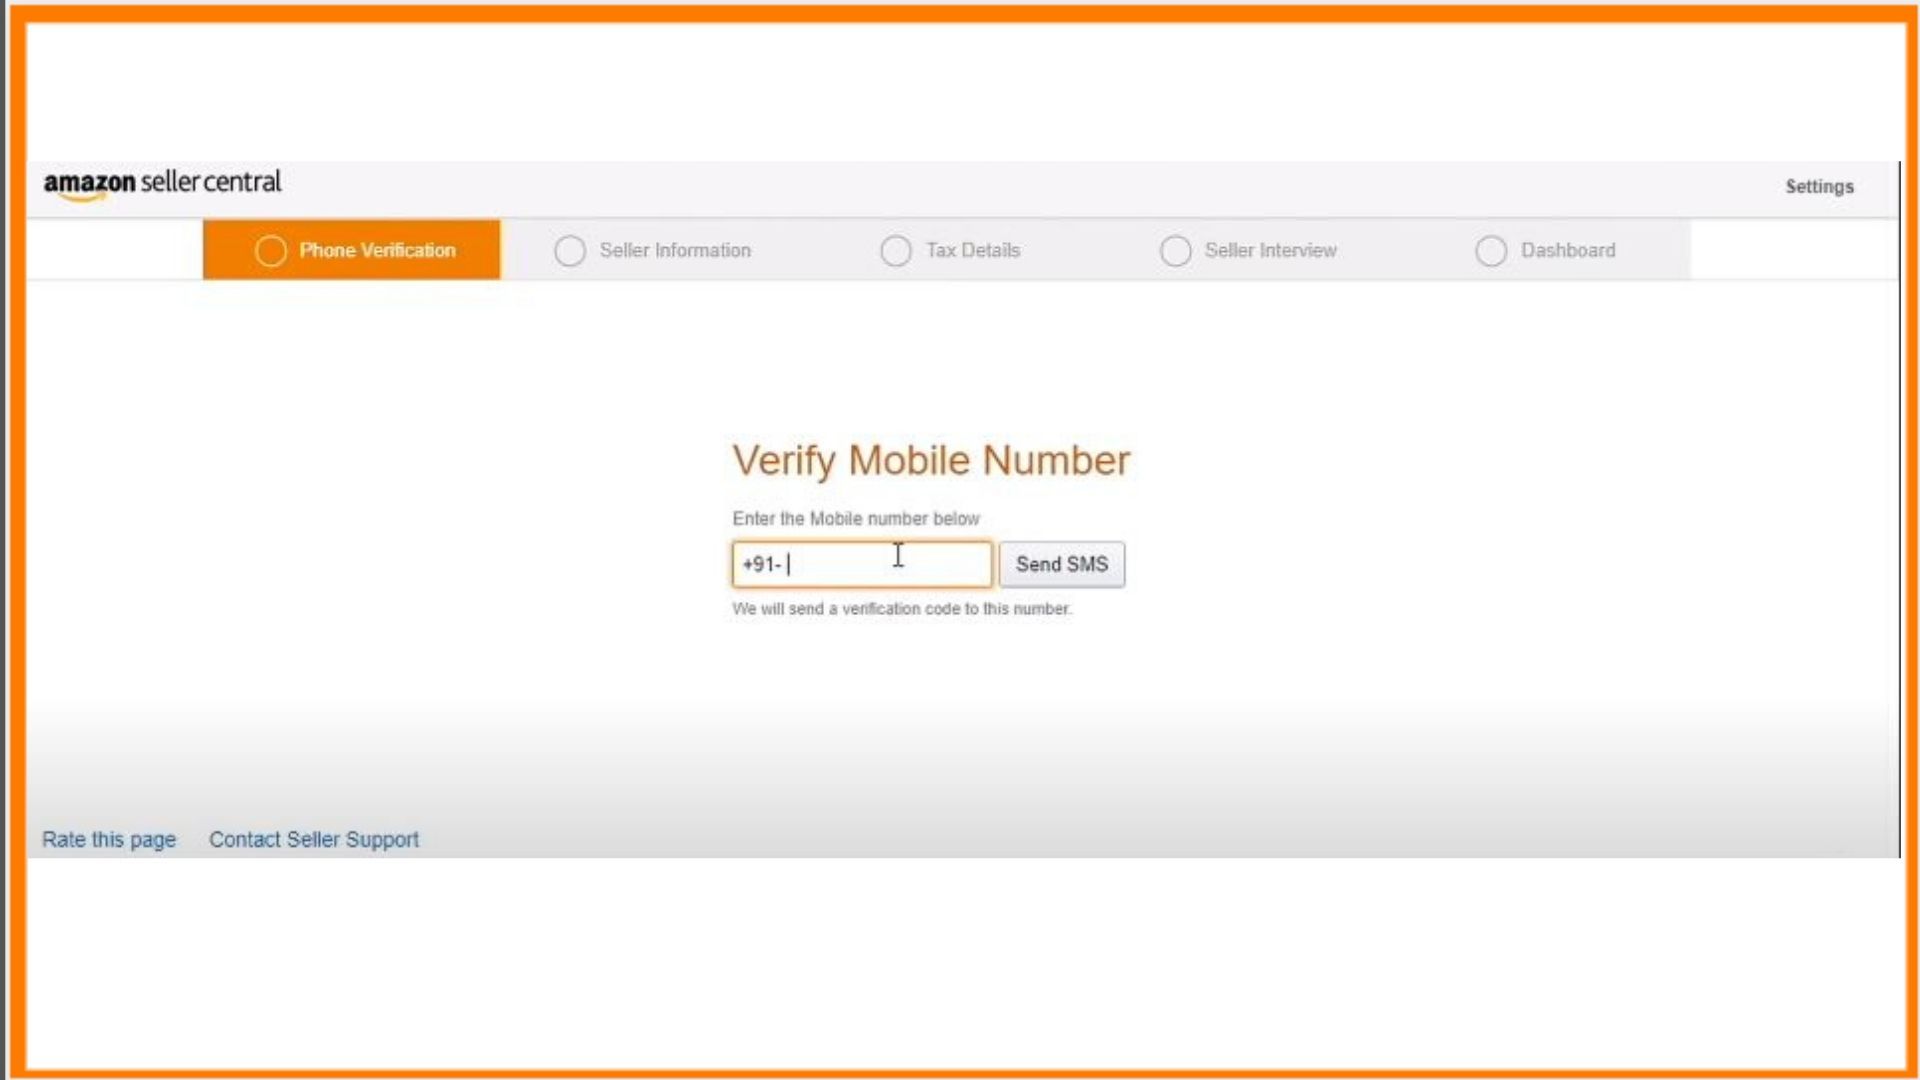 Verify your Mobile Number